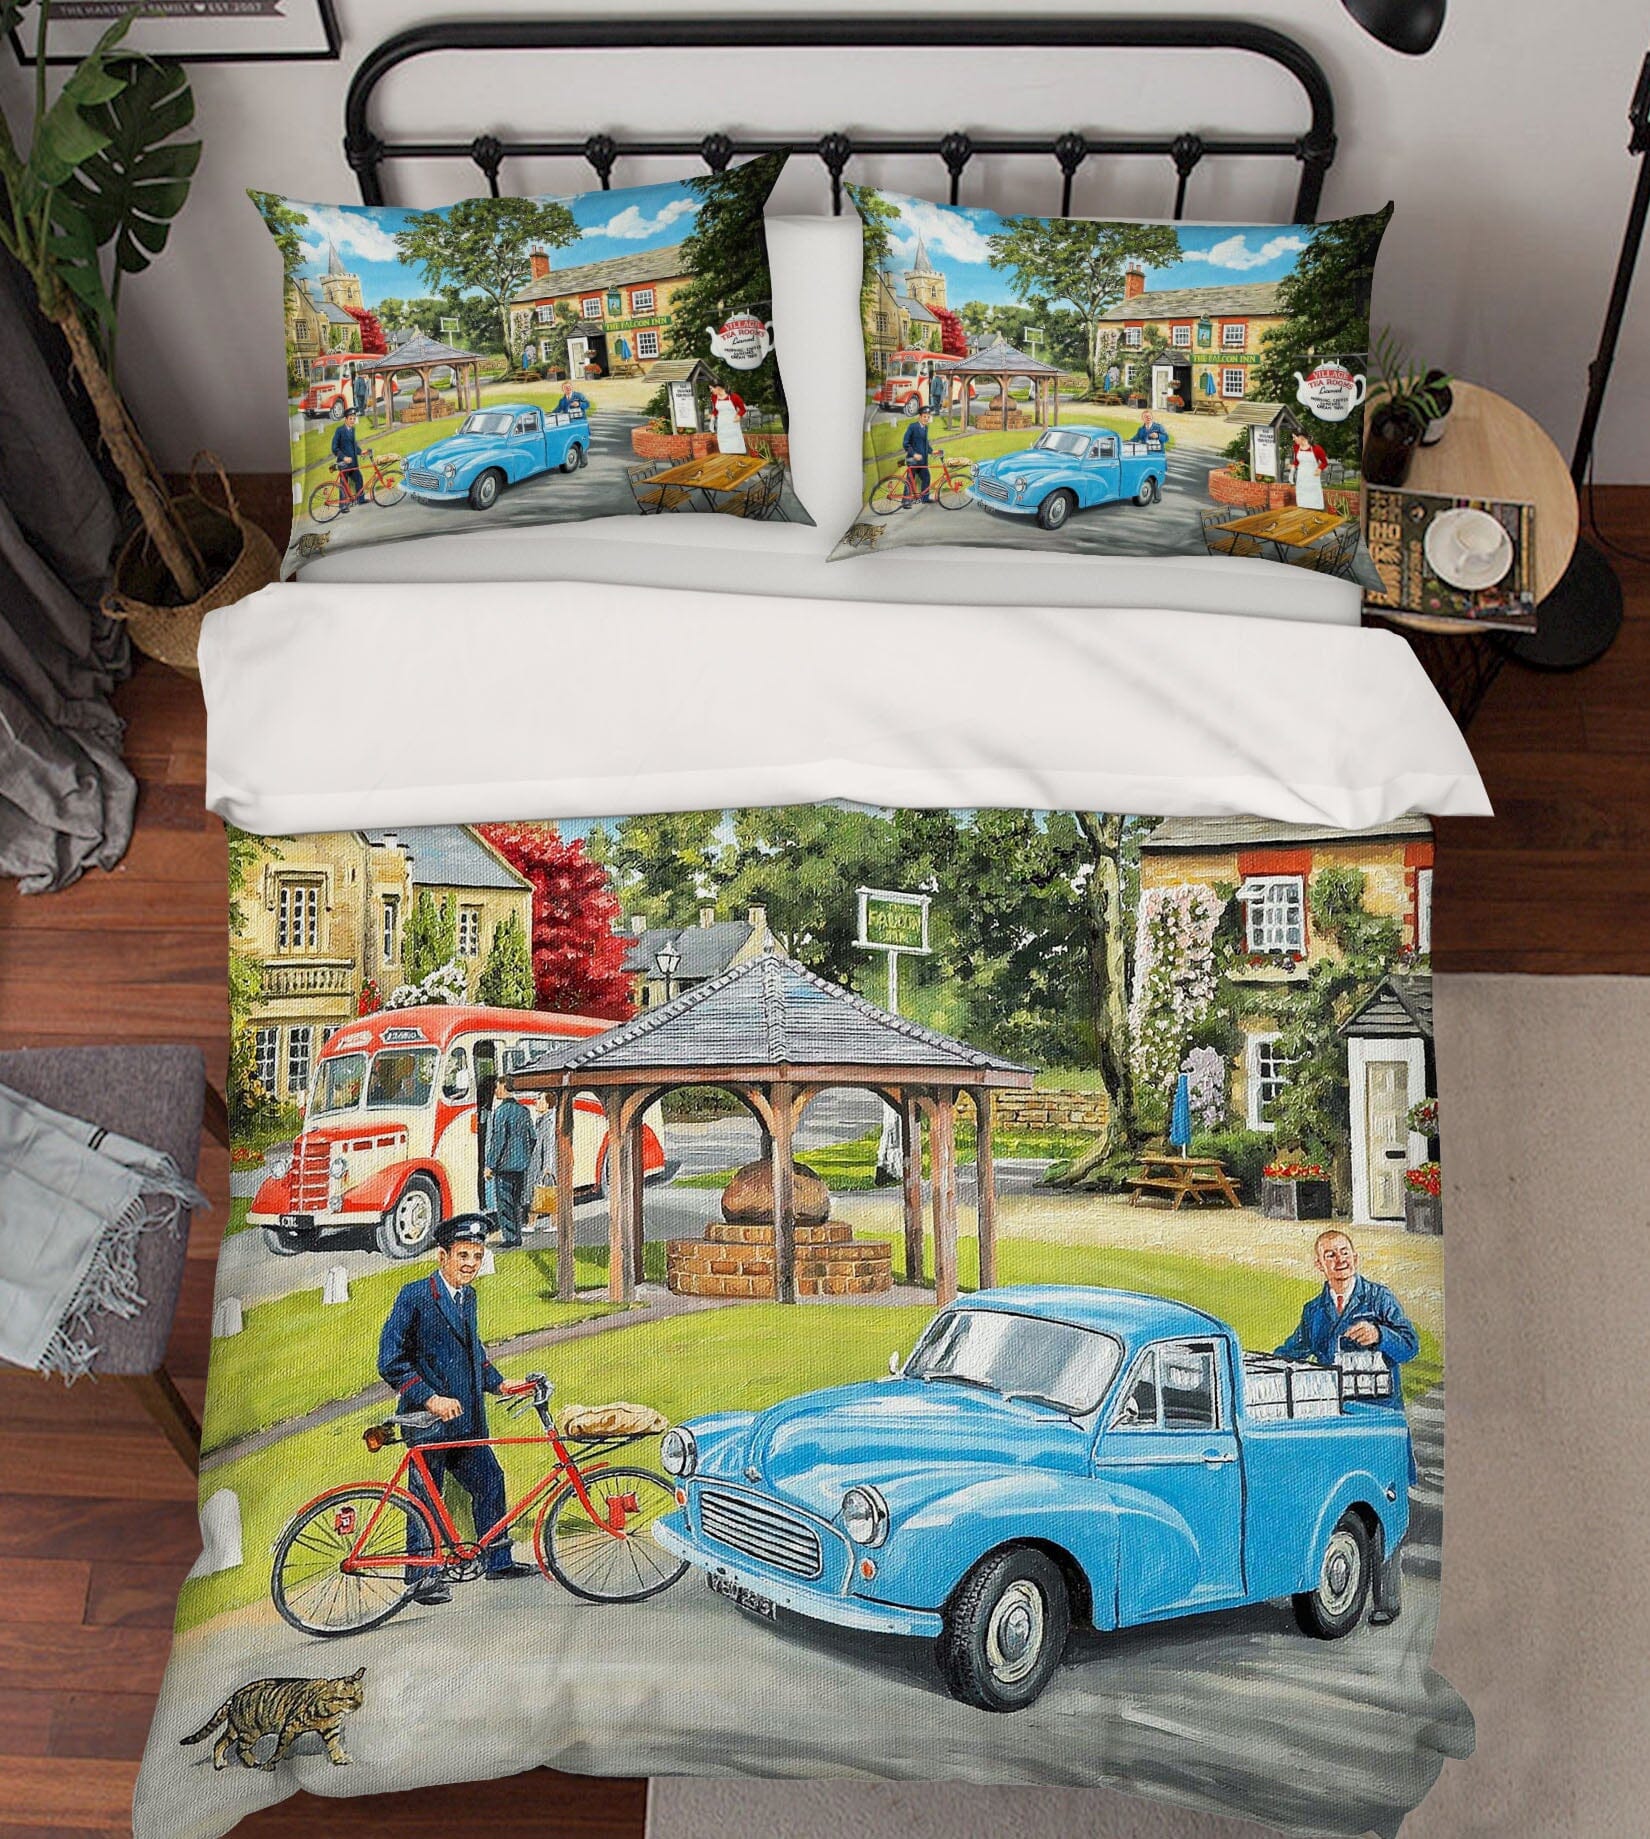 3D The Village Tearooms 2076 Trevor Mitchell bedding Bed Pillowcases Quilt Quiet Covers AJ Creativity Home 